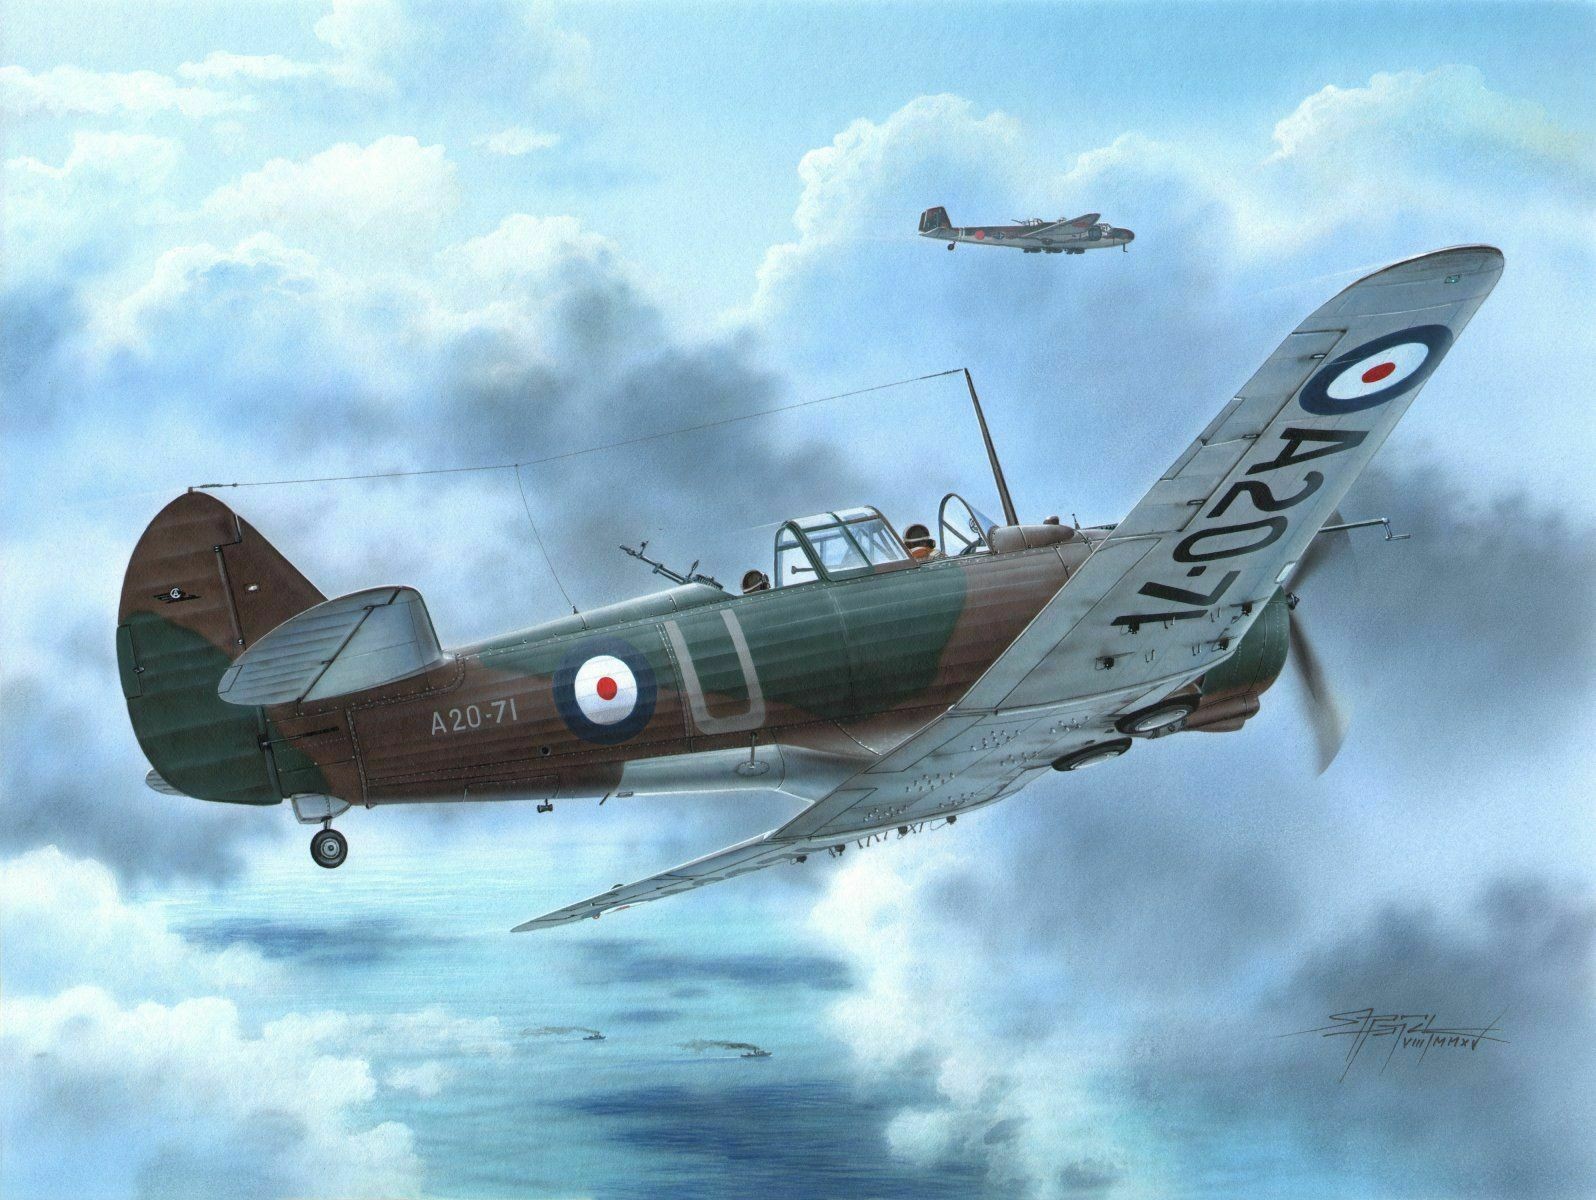 Special Hobby 72331 CAC CA-3/5 Wirraway "First Blood over Rabaul" 1:72